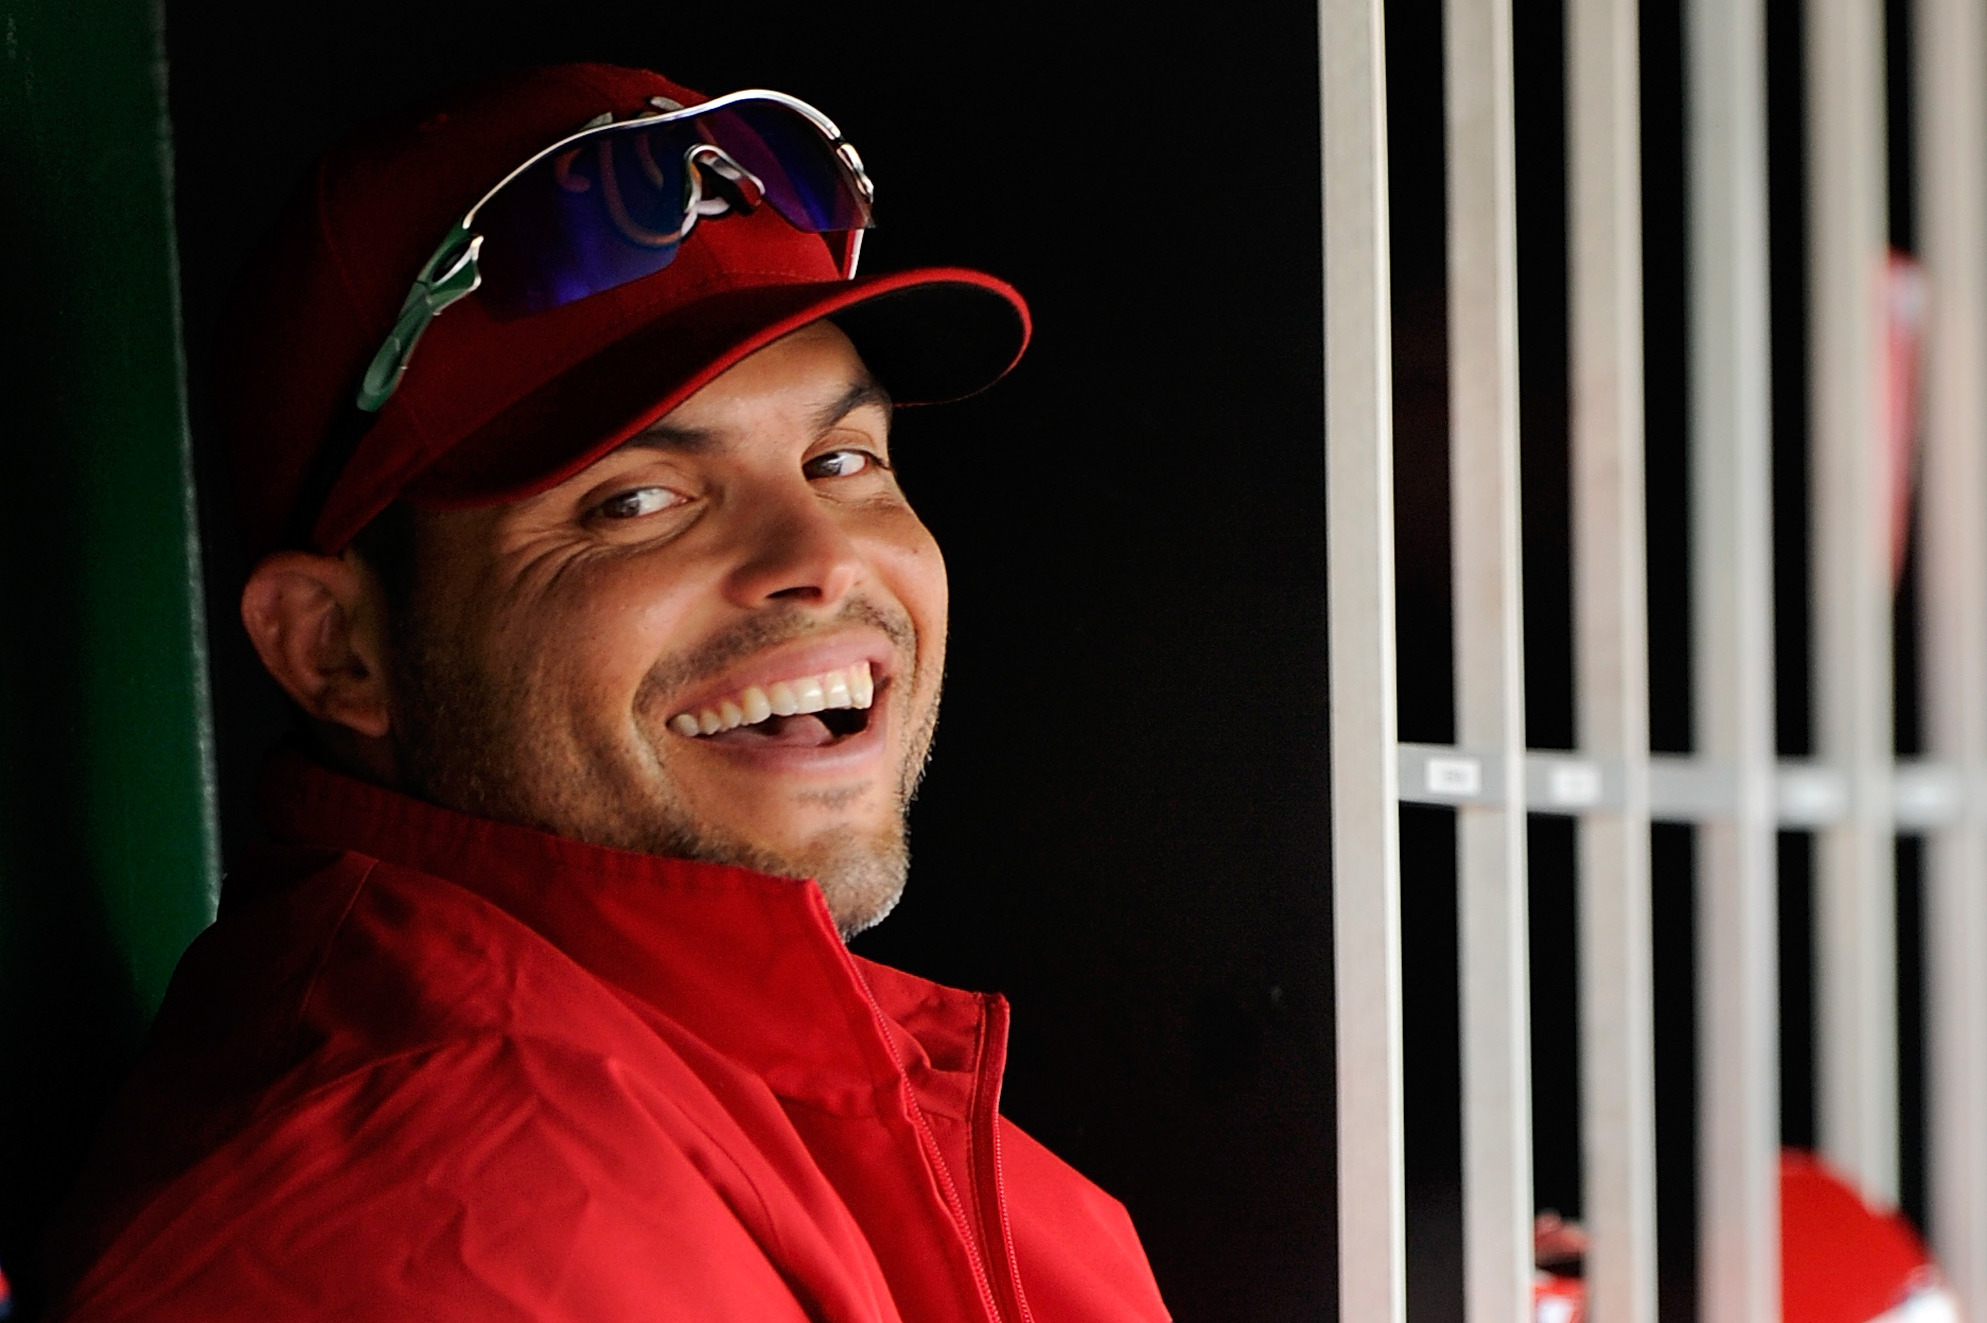 Ivan 'Pudge' Rodriguez Retiring: 12 Stats You Might Not Know About Him, News, Scores, Highlights, Stats, and Rumors